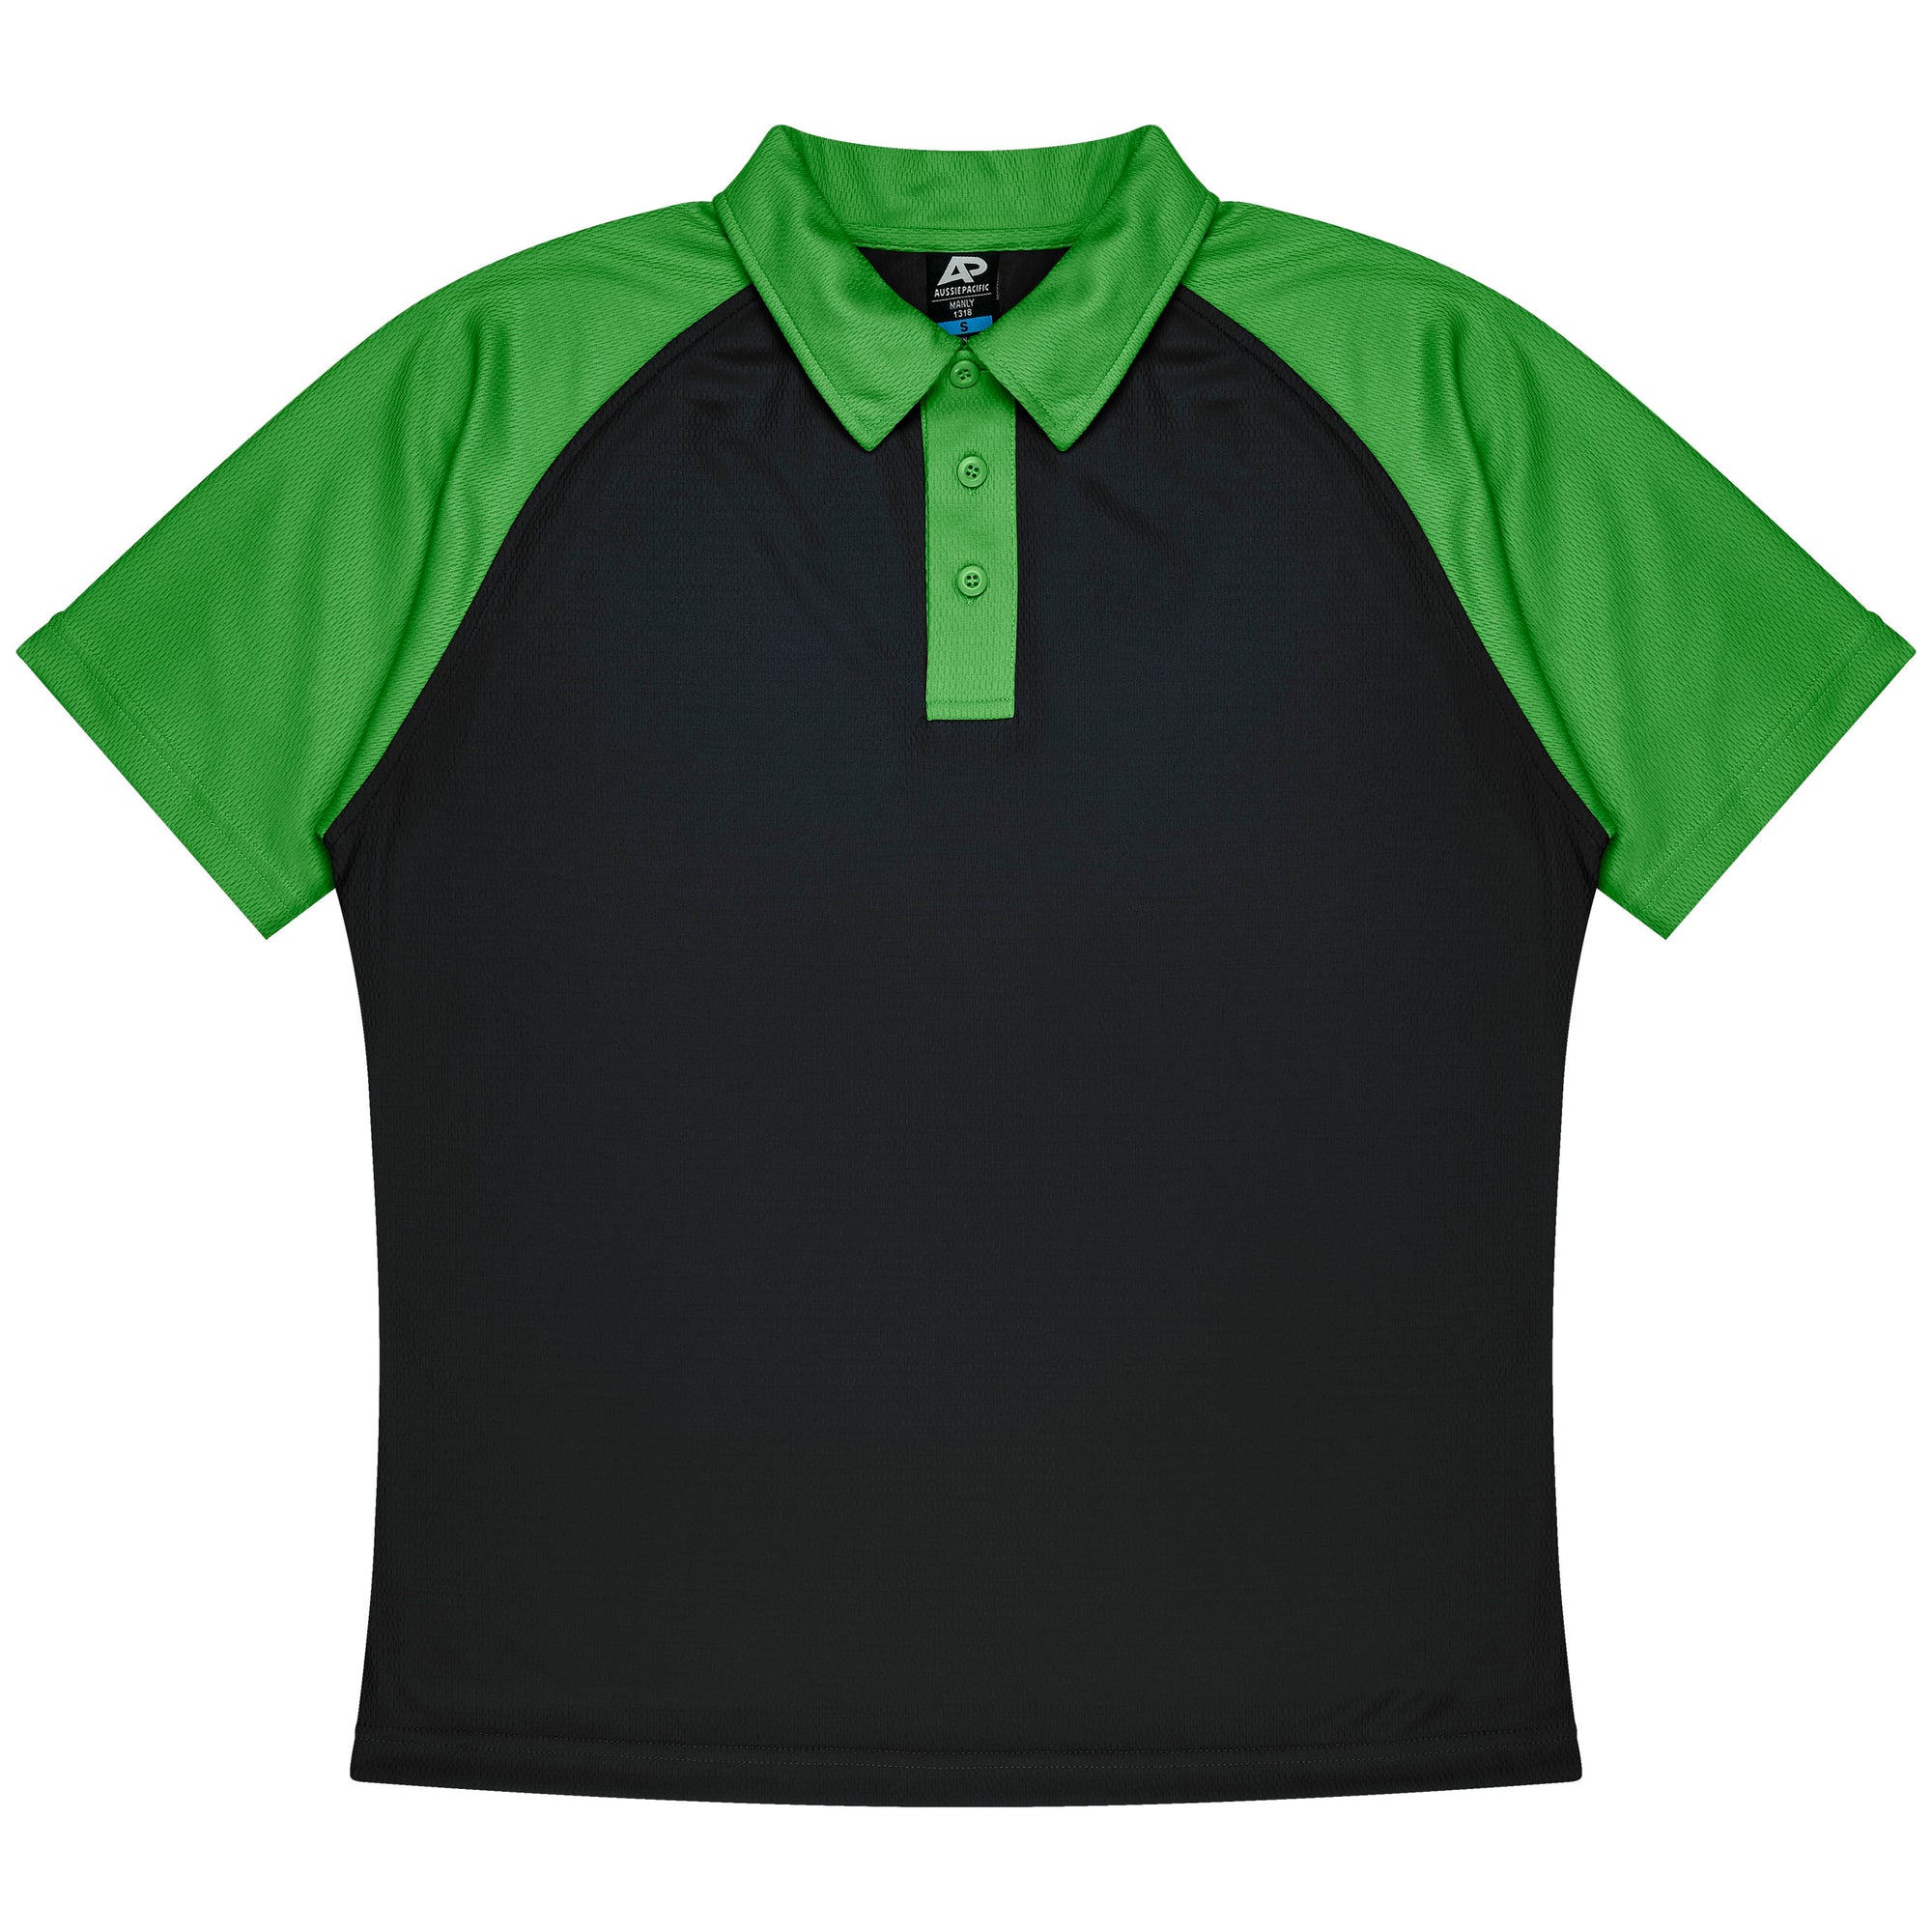 MANLY MENS POLOS - 1318